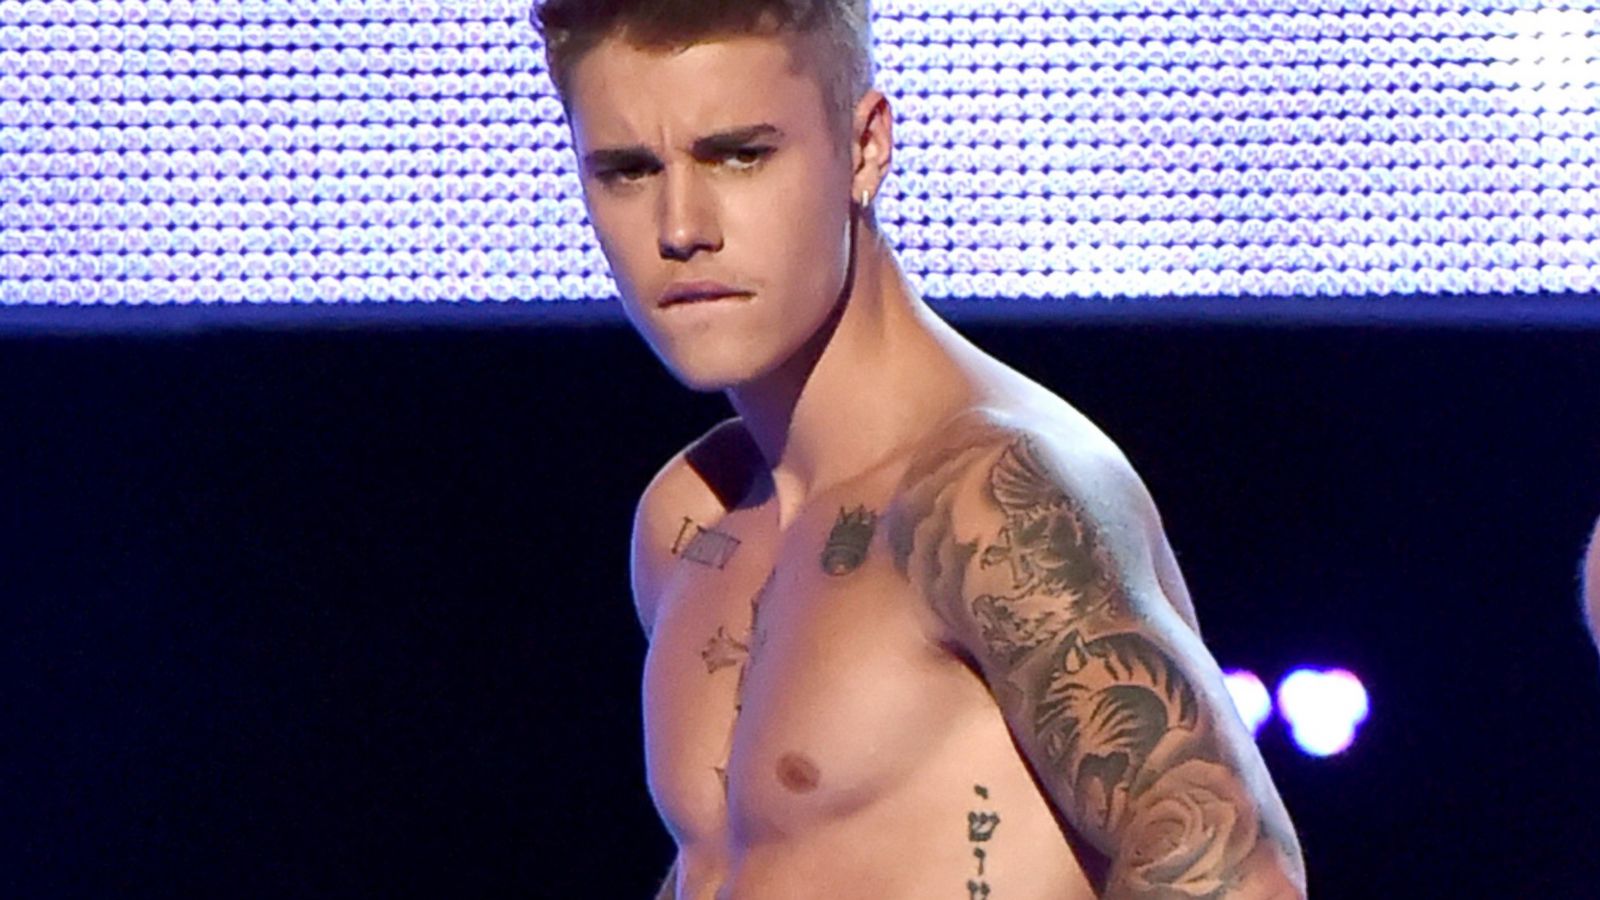 Justin Bieber strips to underwear in 'I'll Show You' music video